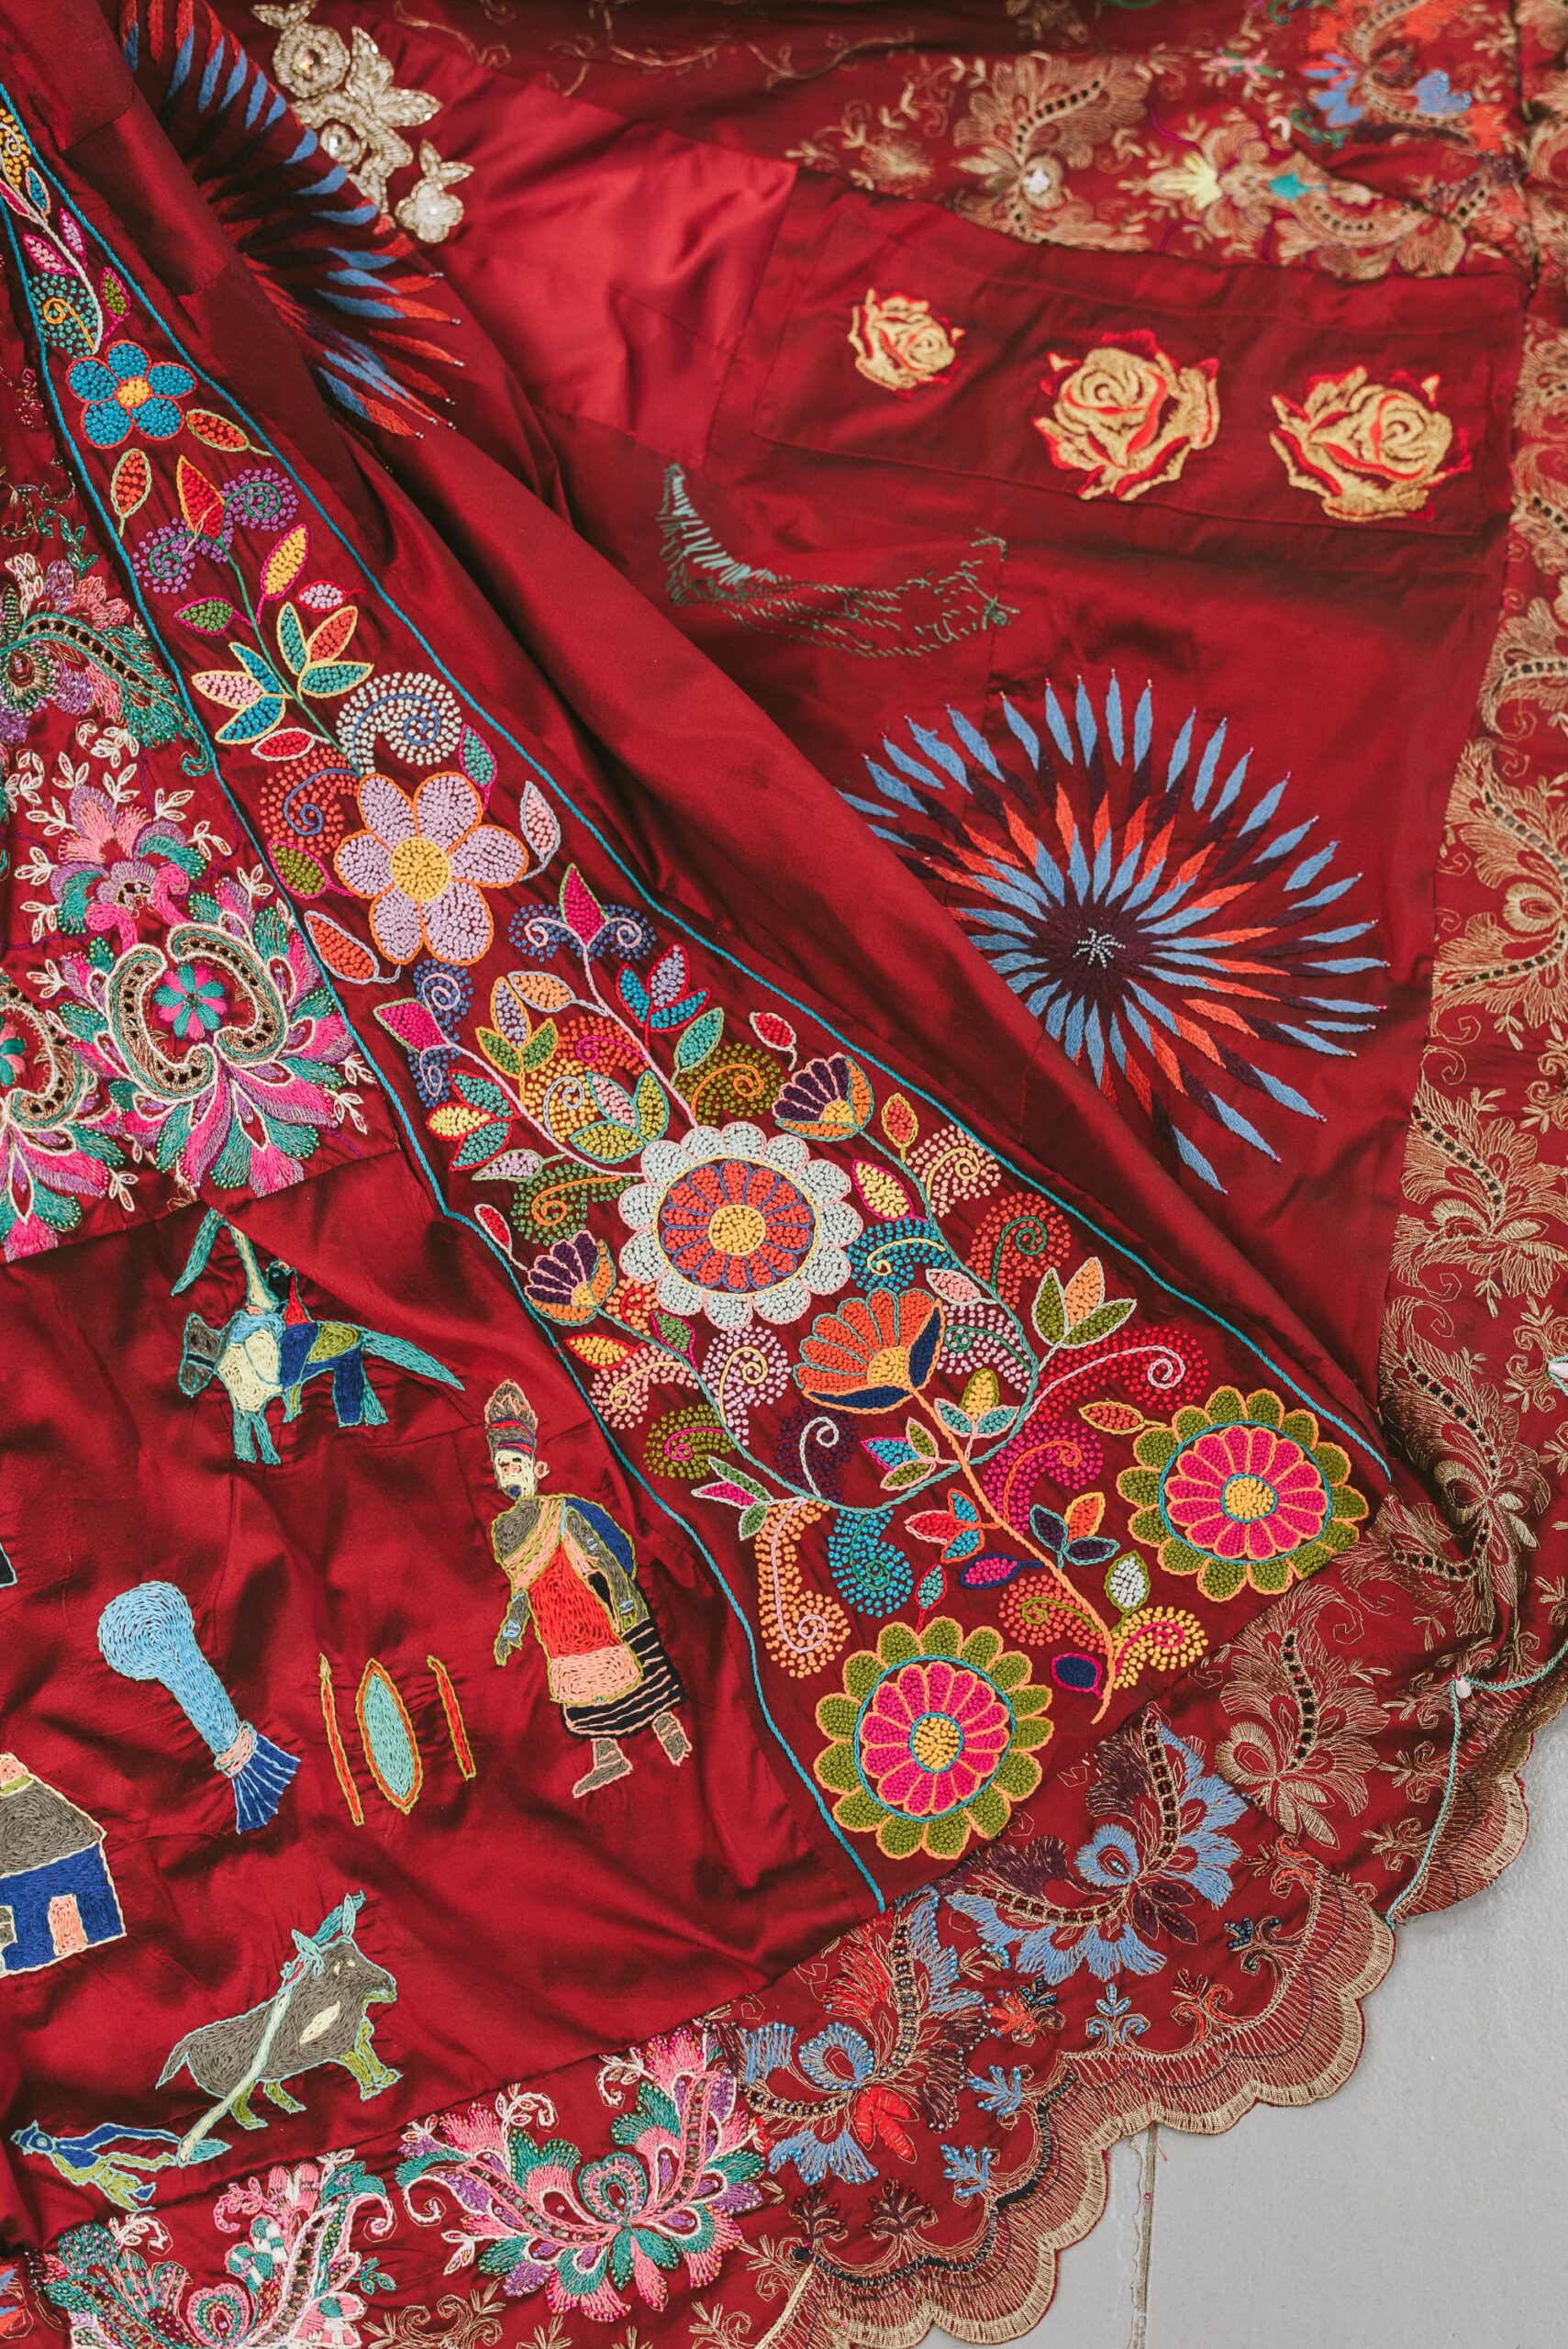 a detail of floral, figurative, and patterned embroideries on a red dress